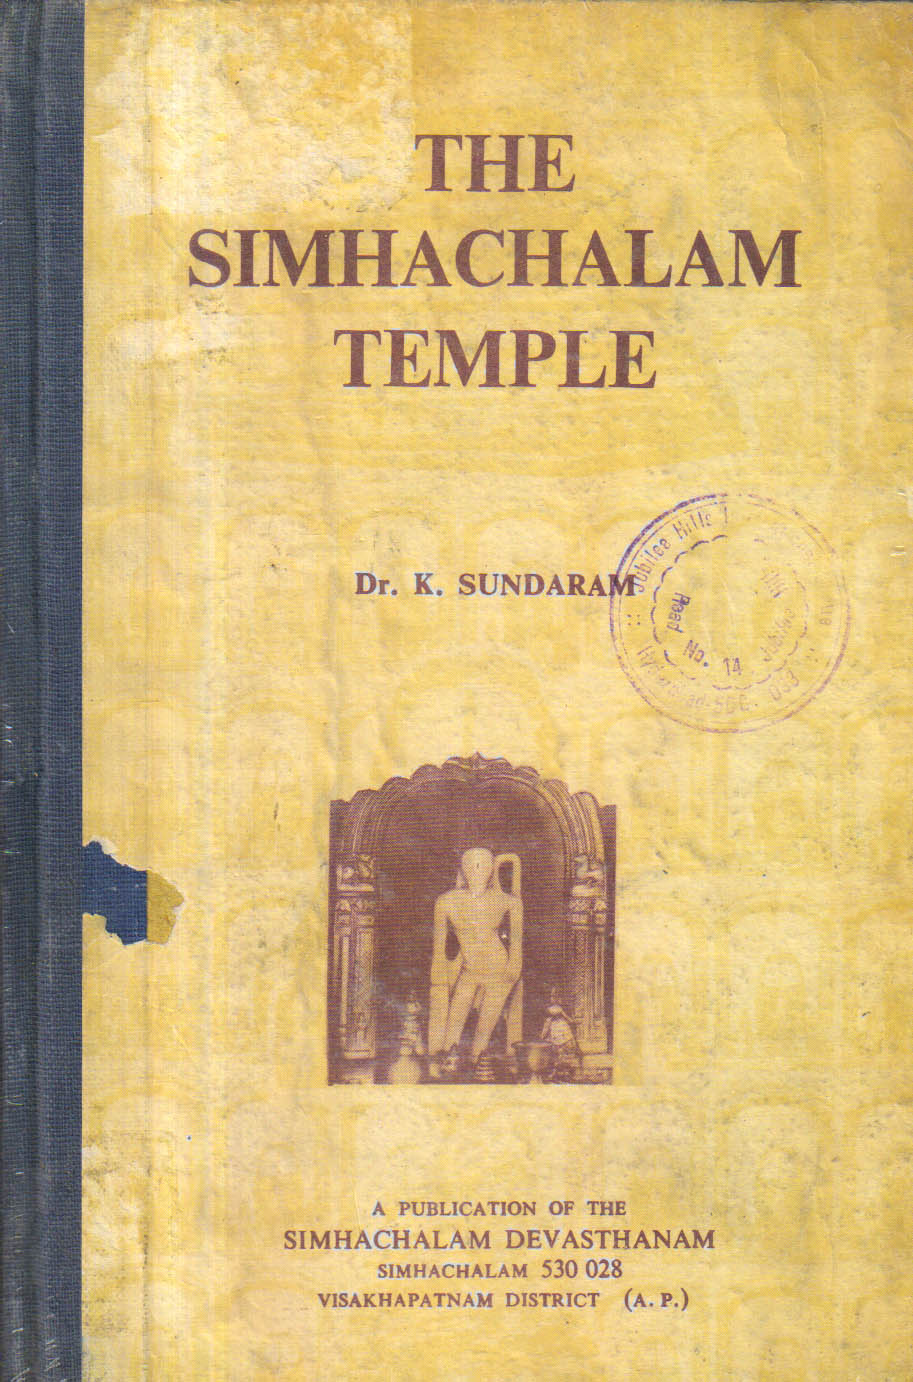 THE SIMHACHALAM TEMPLE